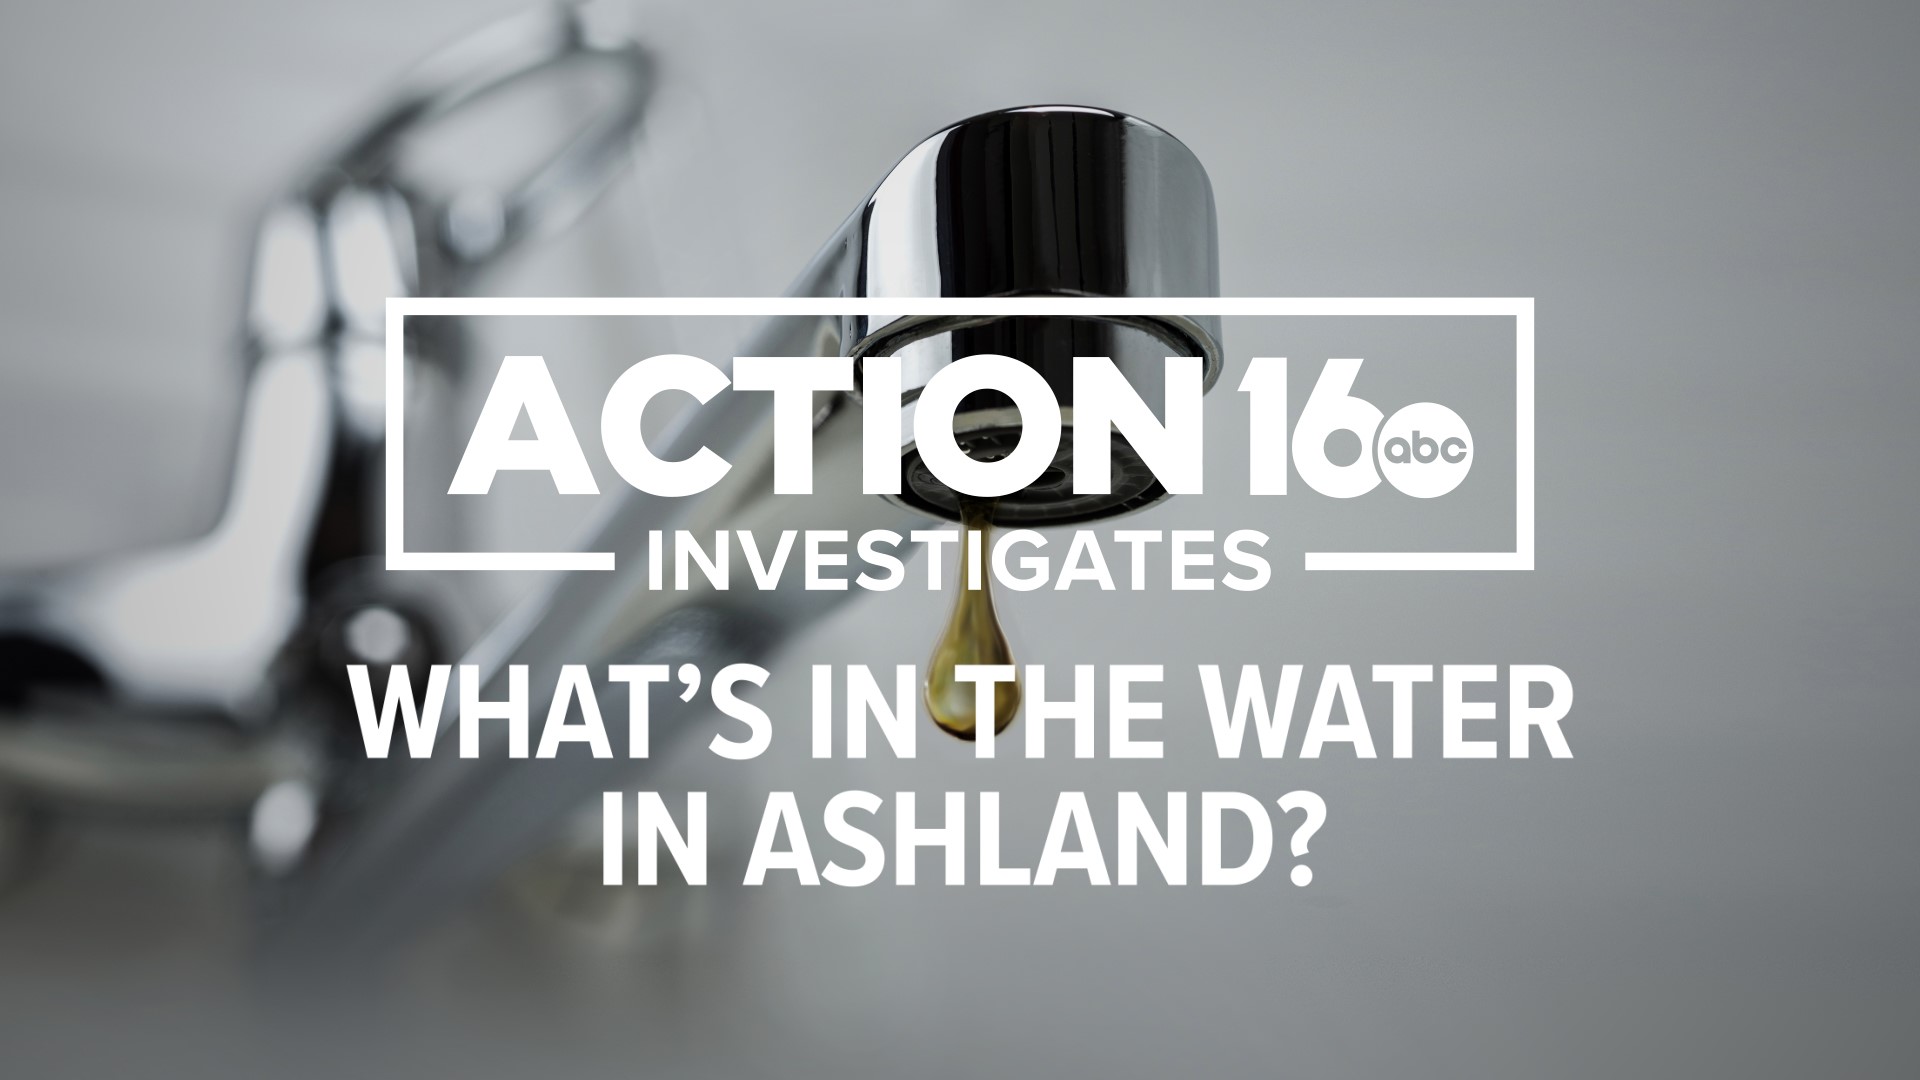 Action 16 Investigates clears up the controversy over brown water in the Ashland area of Schuylkill County